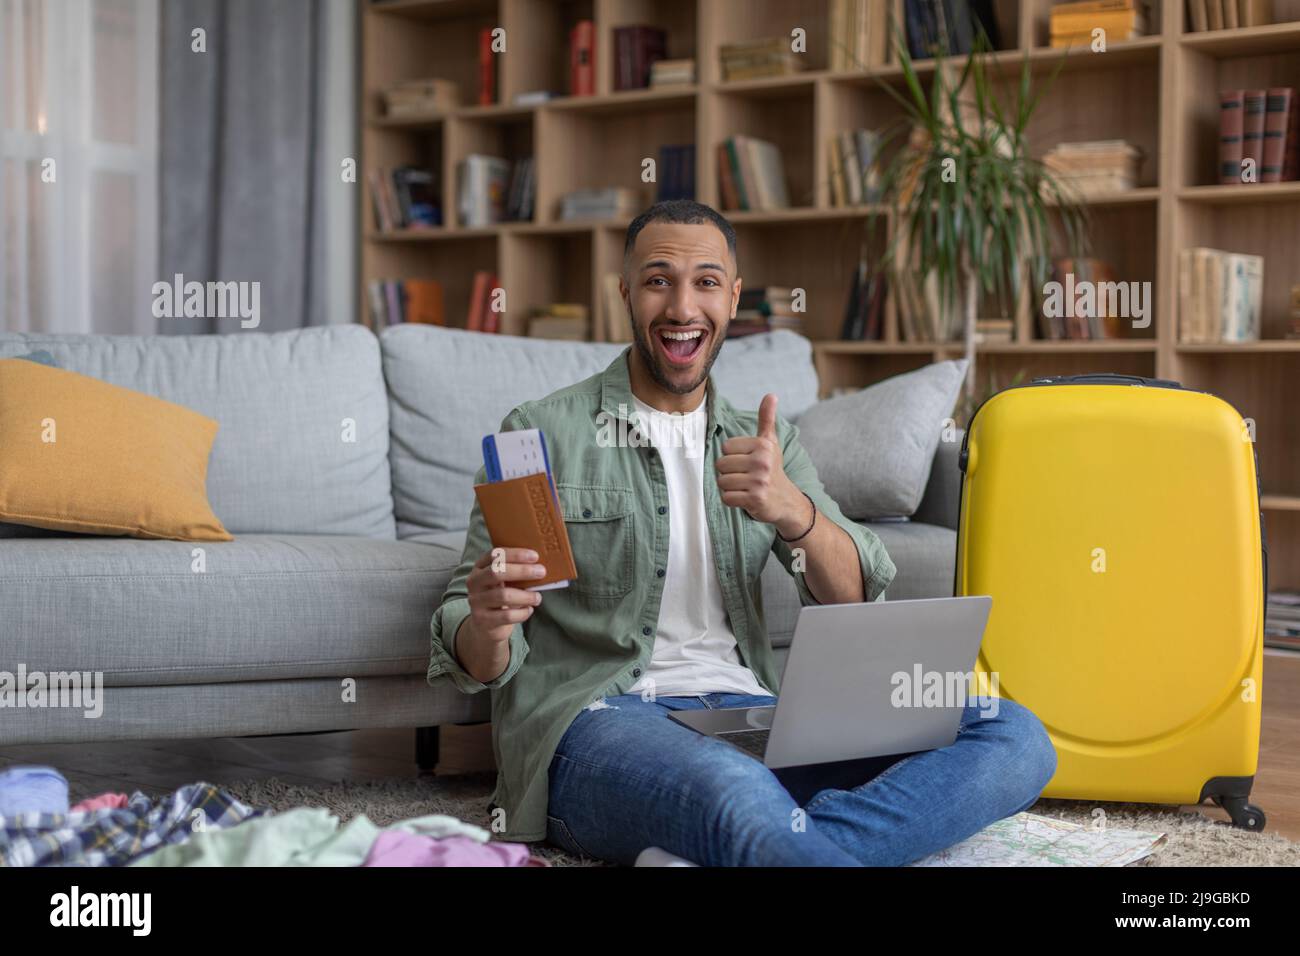 Online hotel reservation concept. Happy black man with passport and tickets using laptop, showing thumb up gesture Stock Photo